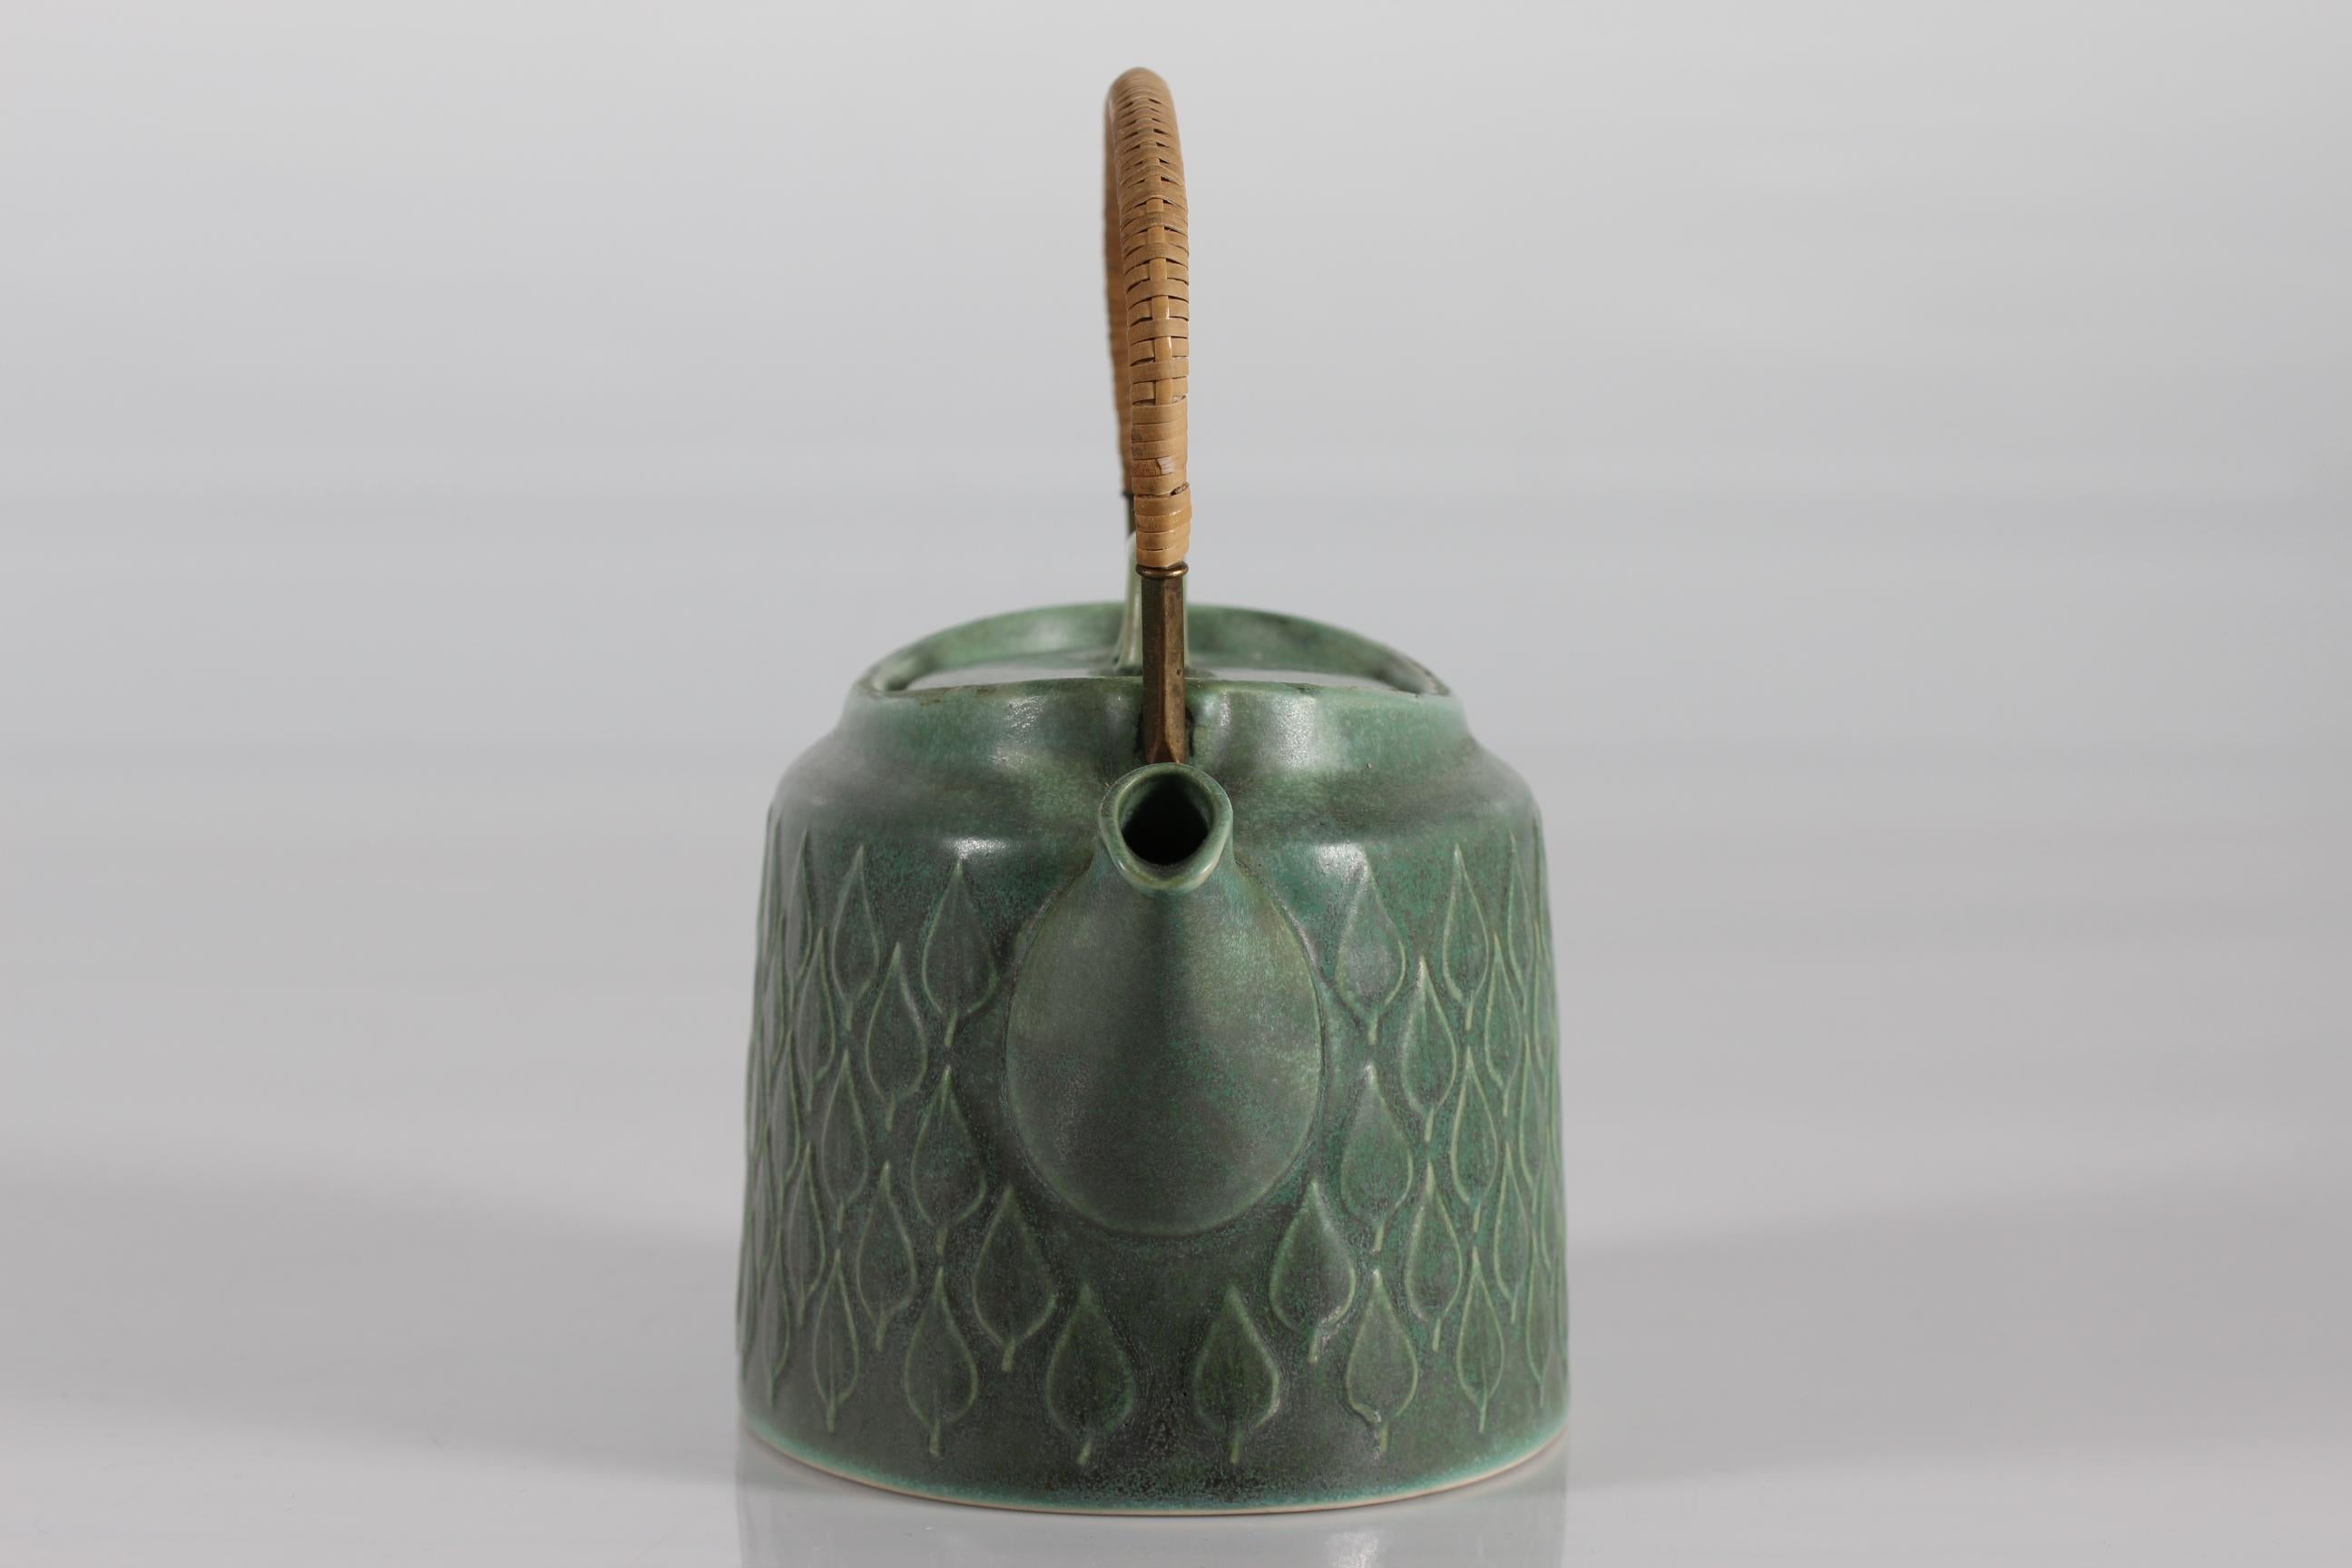 Rare and very early tea pot from the well known service RELIEF launched in 1959 designed by Danish Jens Harald Quistgaard IHQ.

The tea pot has a brass + rattan handle and an embossed leaf shaped decoration. The color of the glaze is salt